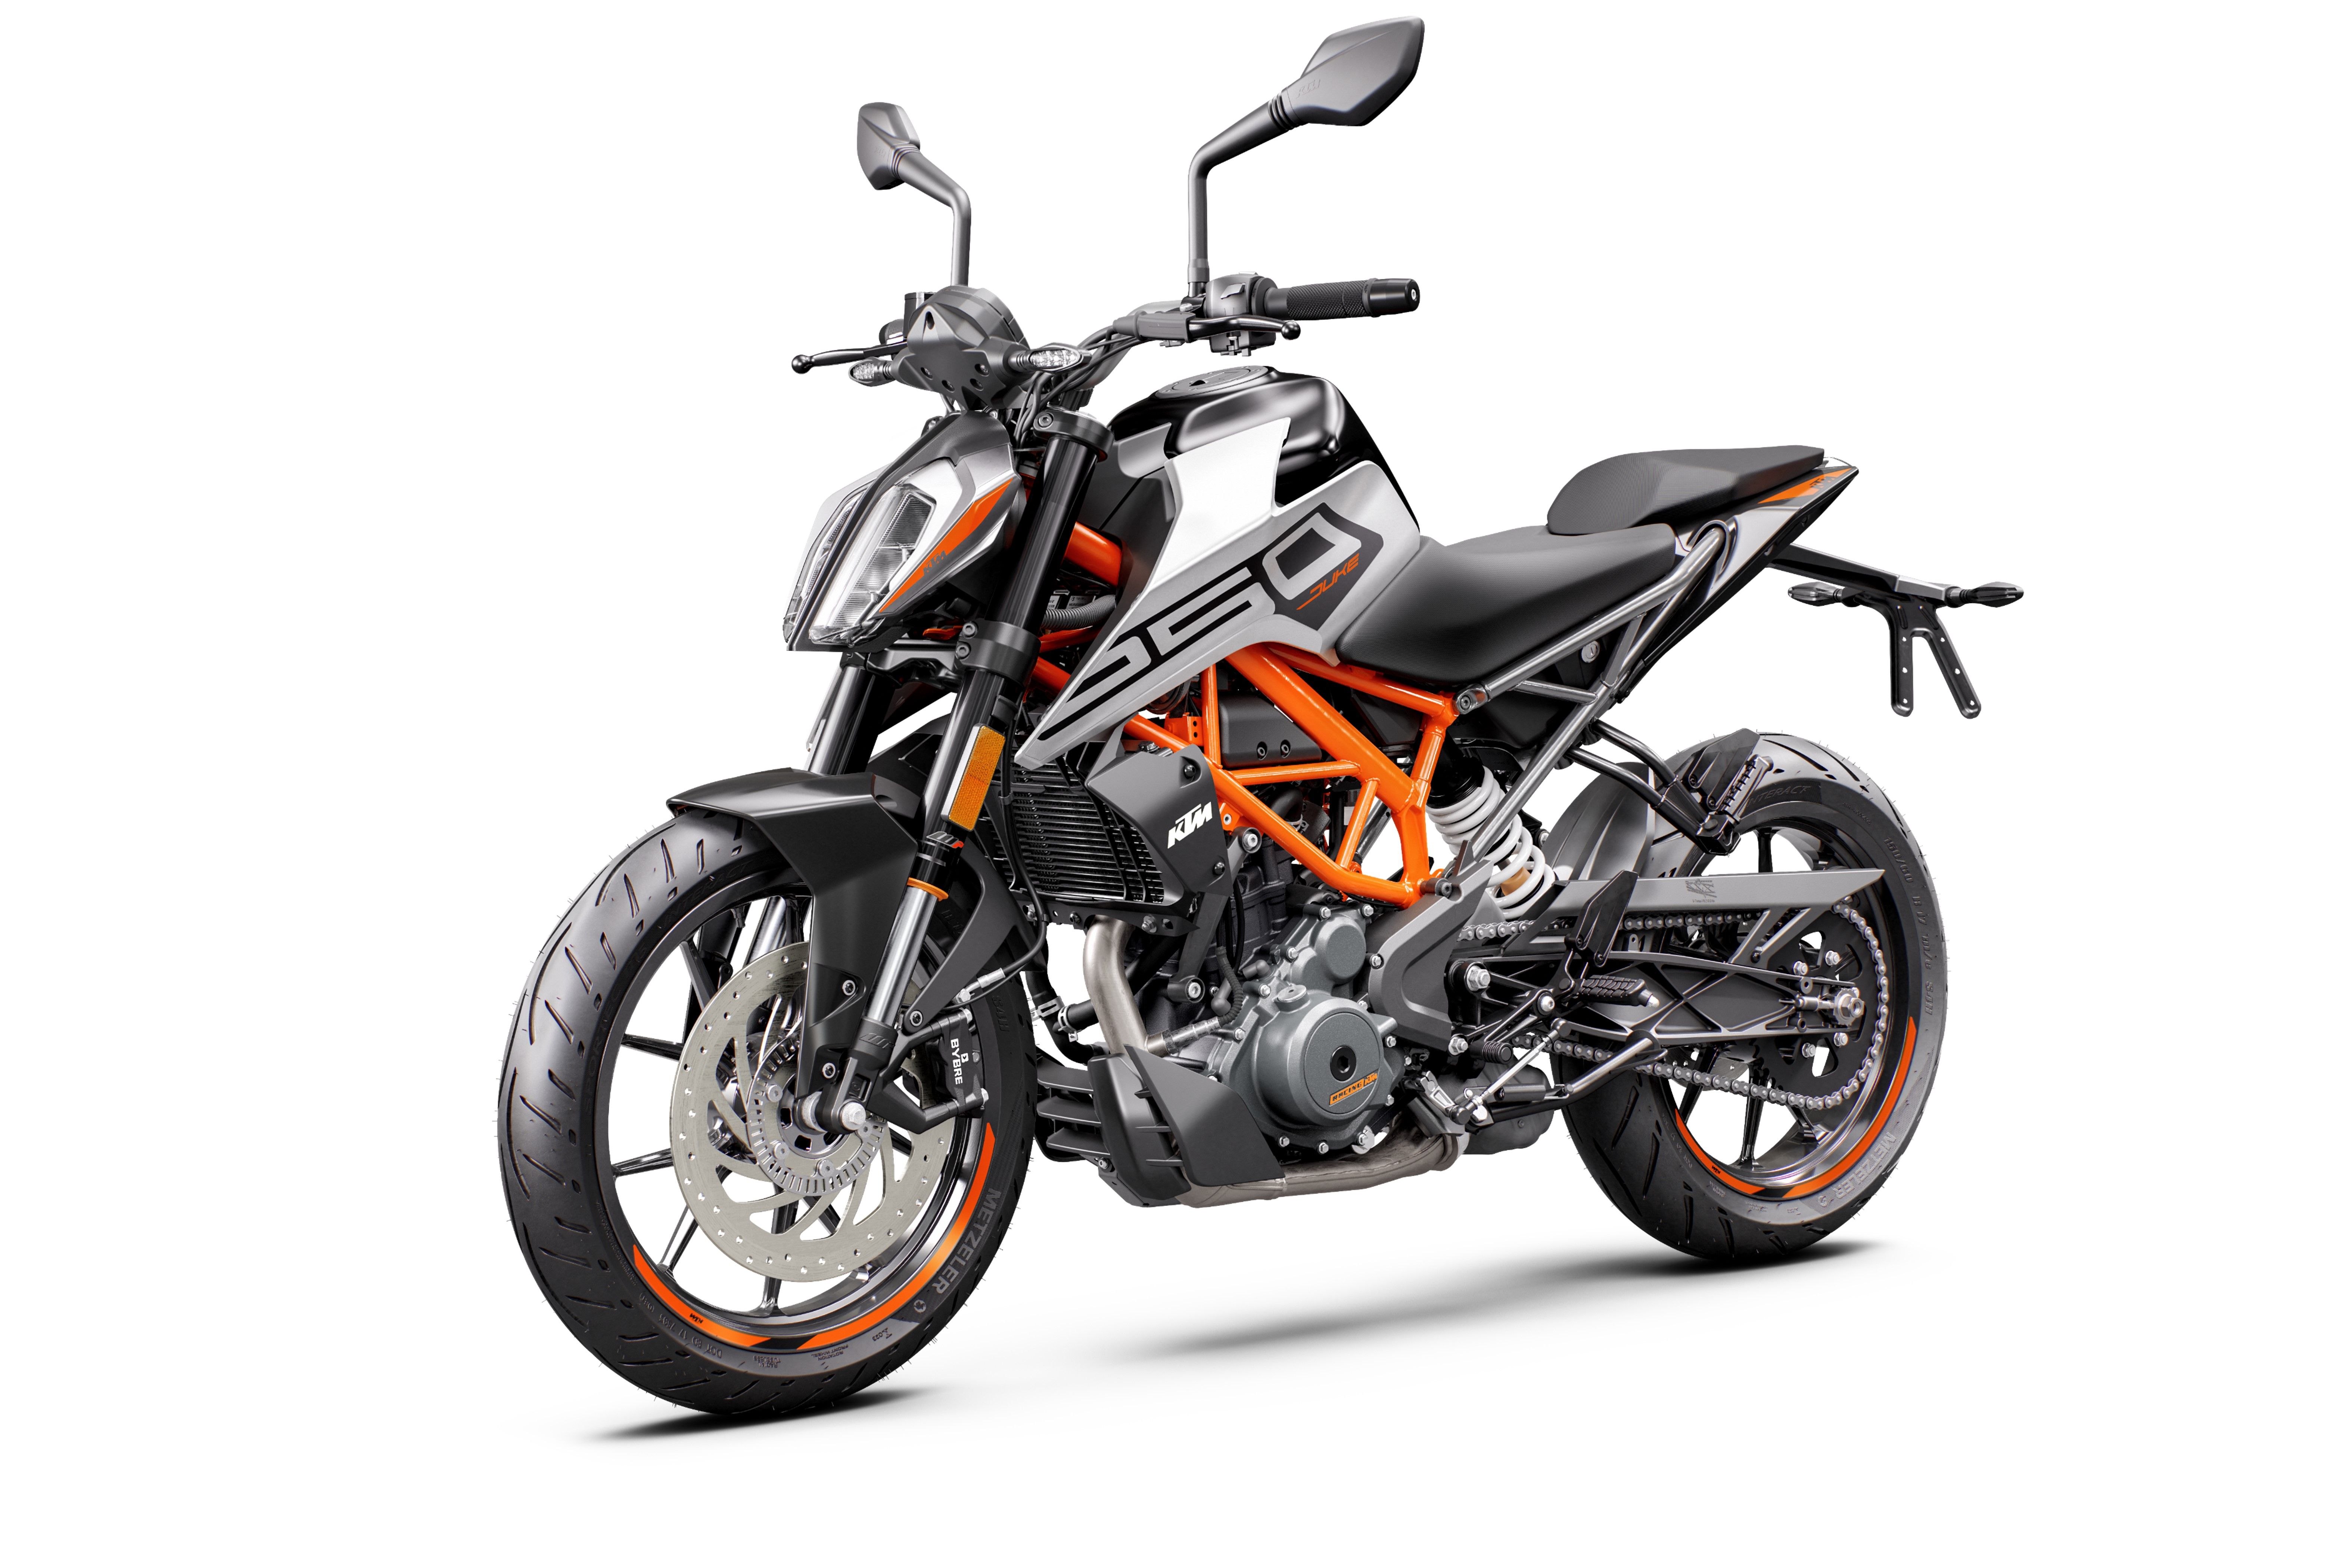 KTM 250 Duke BS6 With LED Headlight Officially Launched